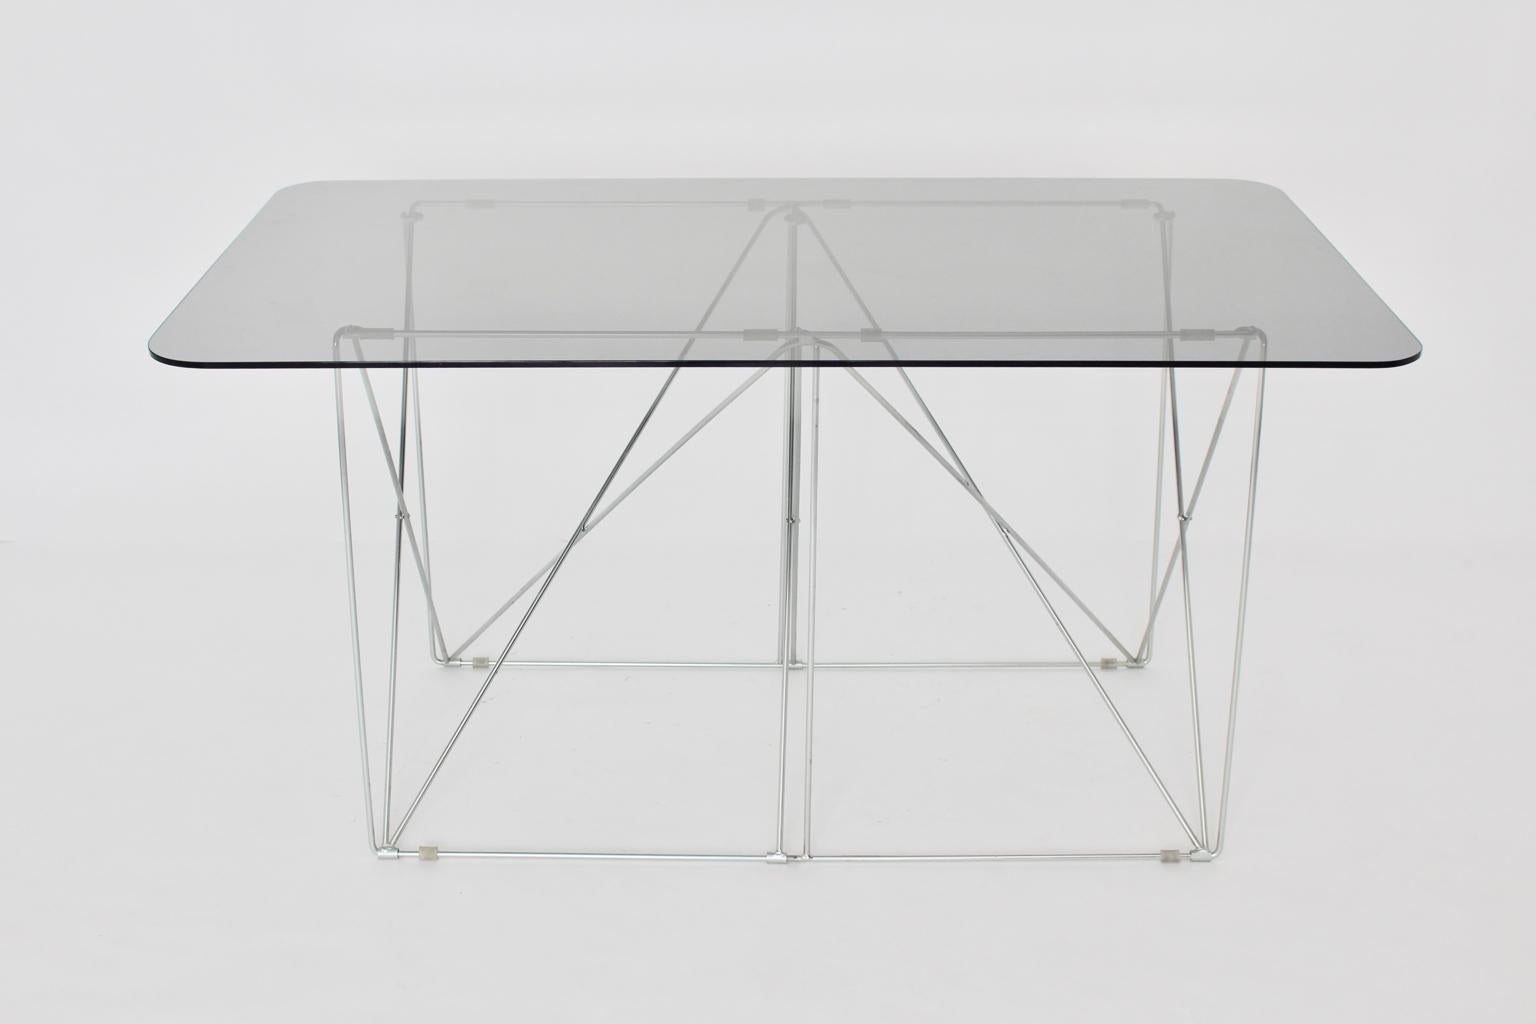 Late 20th Century Mid-Century Modern Vintage Foldable Metal Dining Table Max Sauze, circa 1970 For Sale